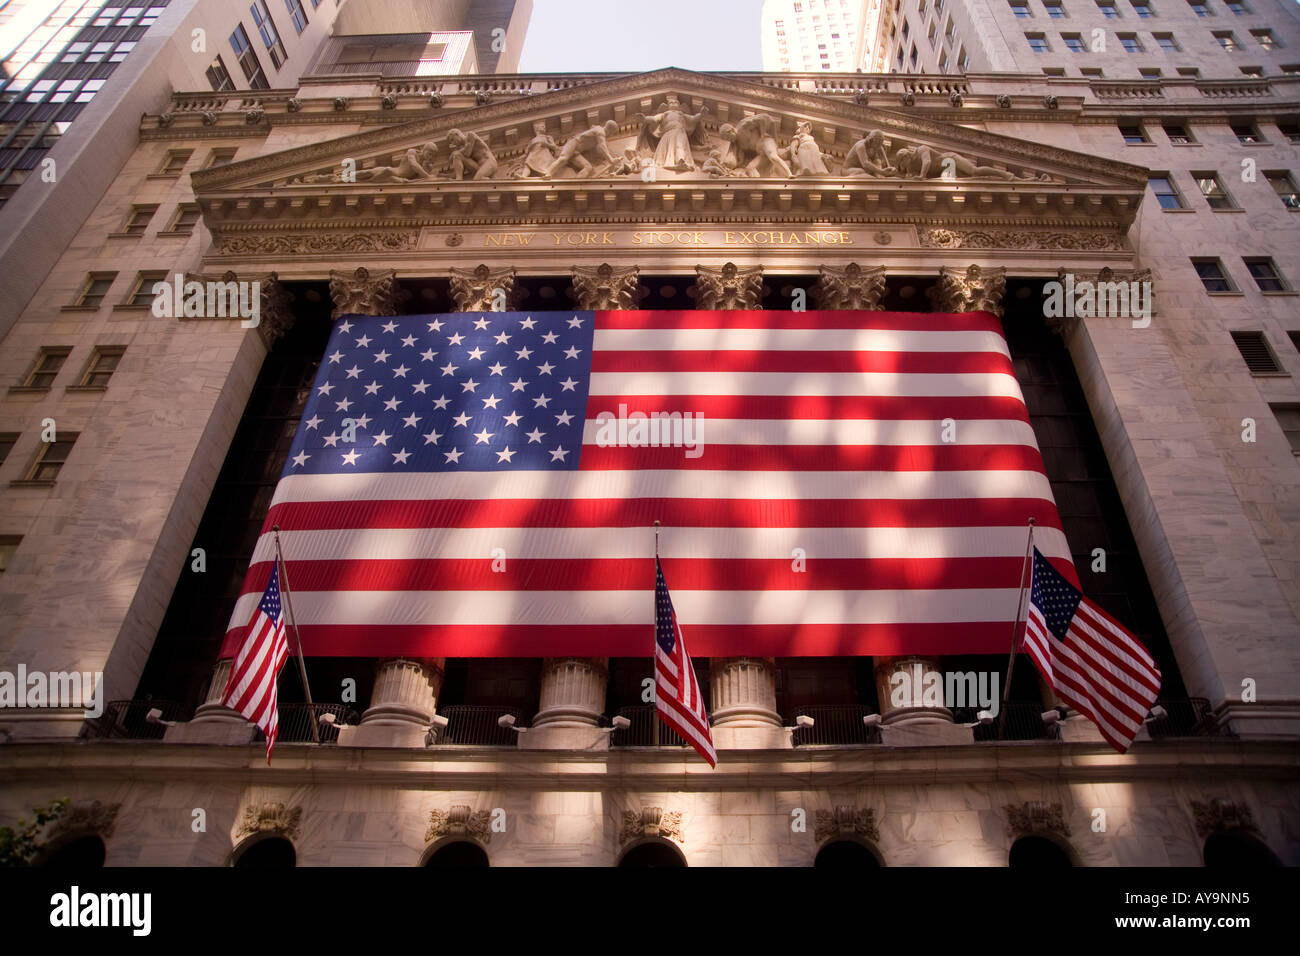 A huge American flag decorates the Greek Revival facade of the Stock Exchange on Broad Street in Manhattan New York City Stock Photo